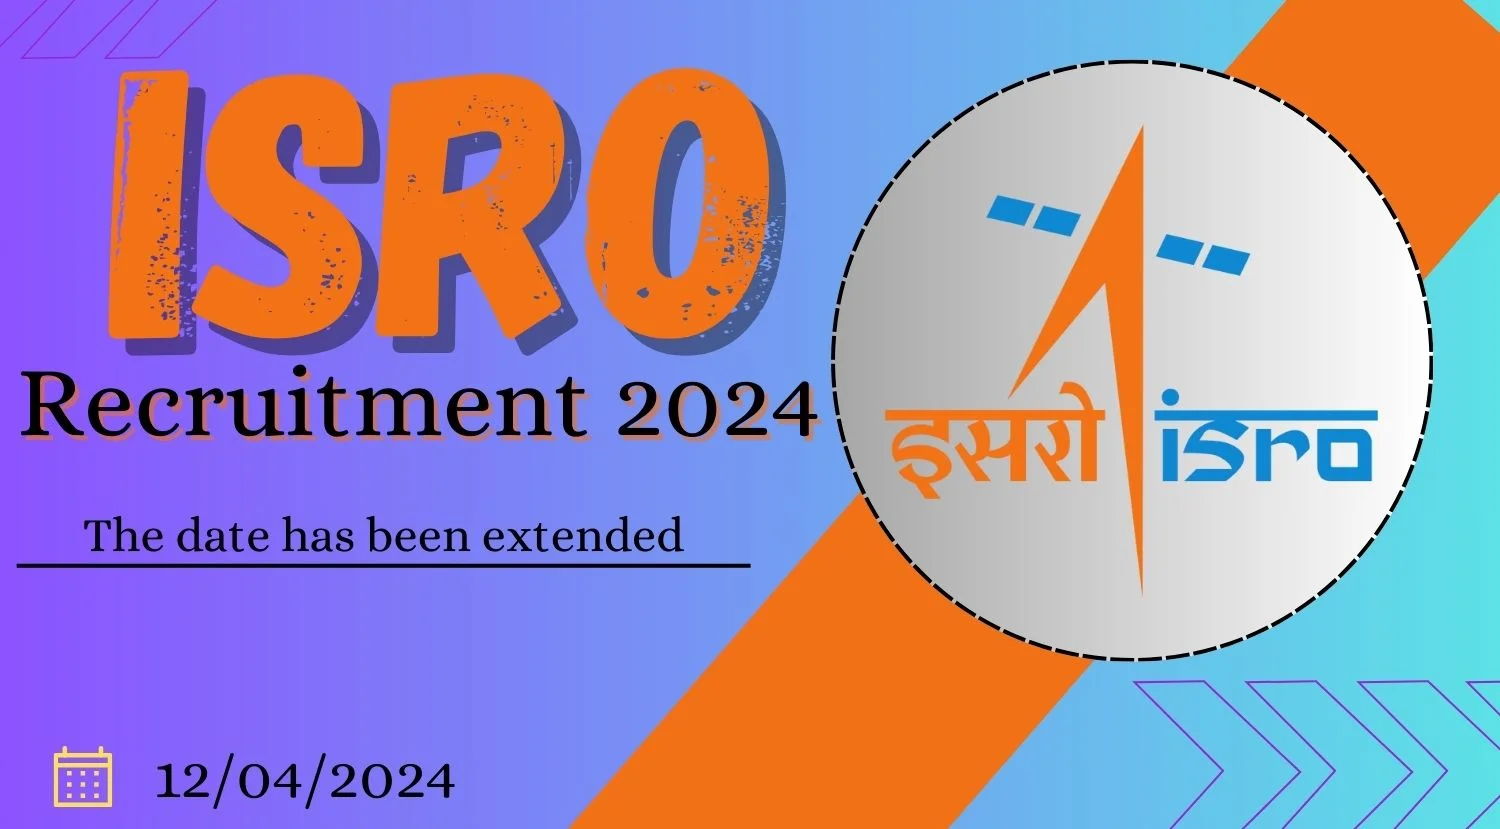 ISRO NRSC Recruitment 2024 Date has been extended, Here's the Details